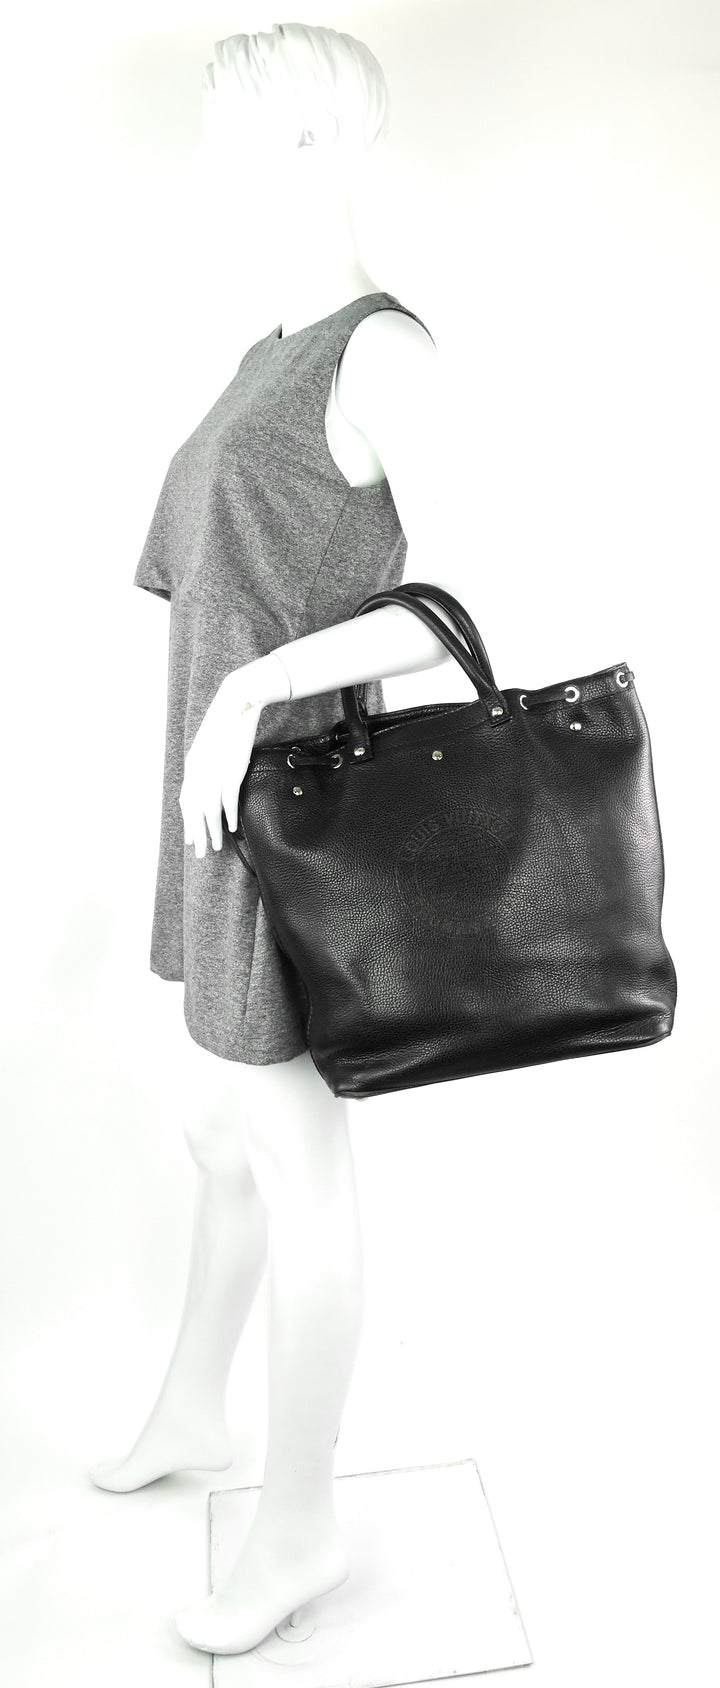 'trunks & bags' shoe tobago leather tote bag